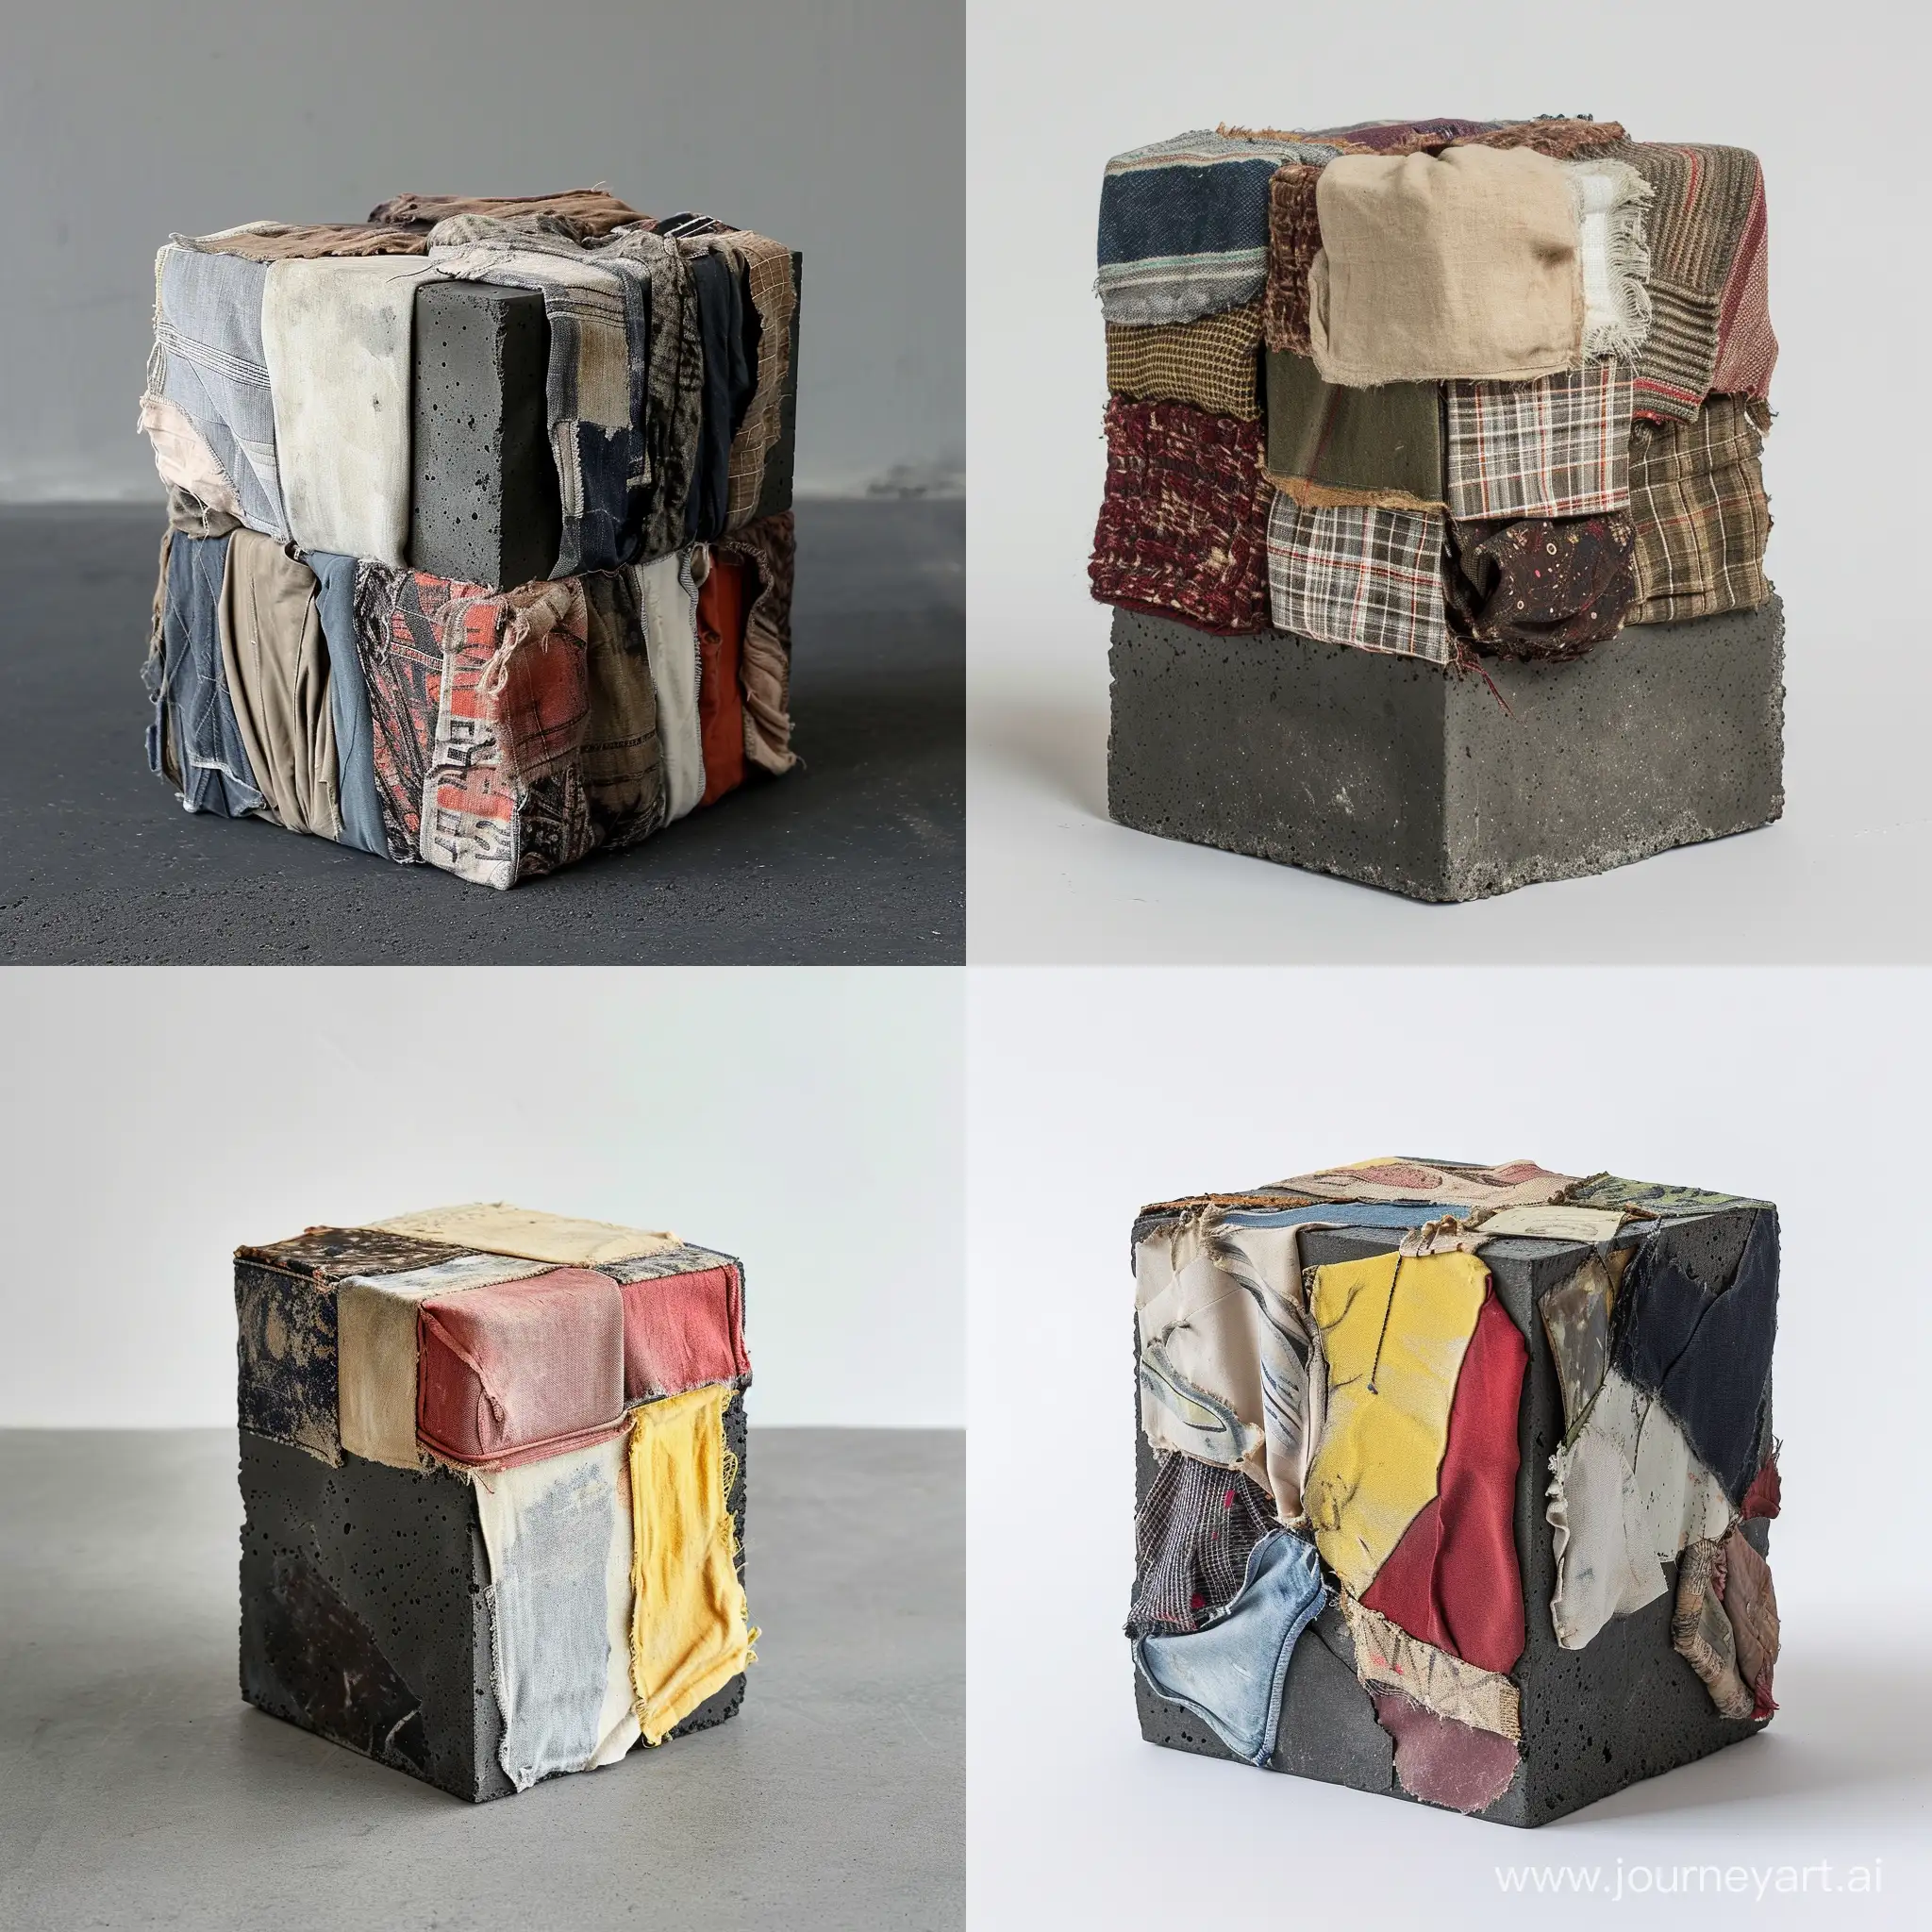 create on esingle block made out of clothes/textiles and dark concrete